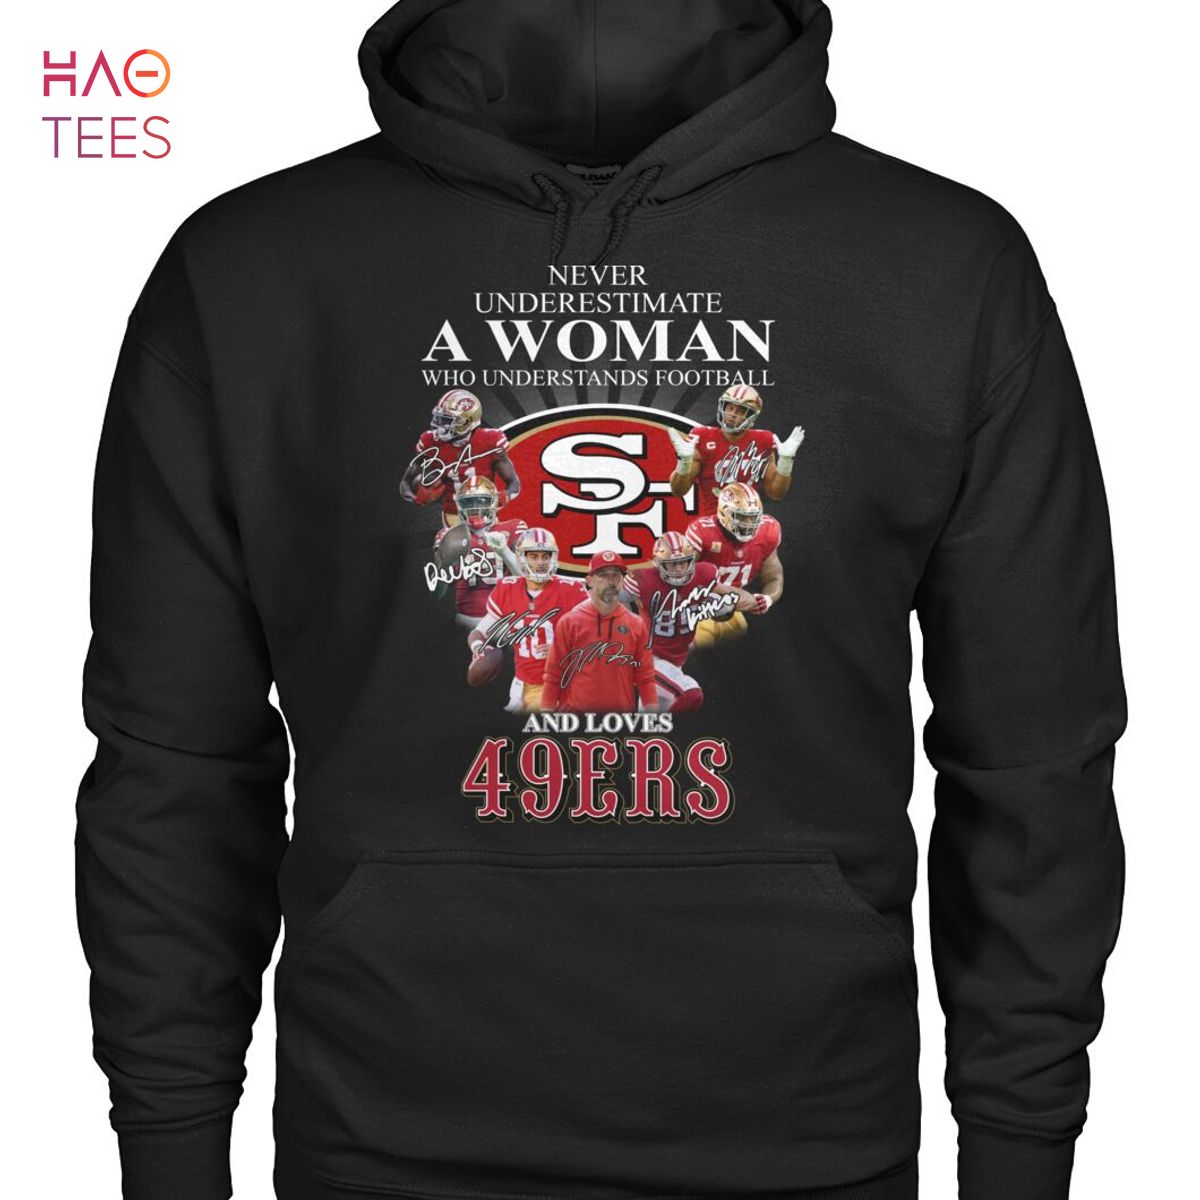 Never Underestands Football And Loves 49ERS Shirt